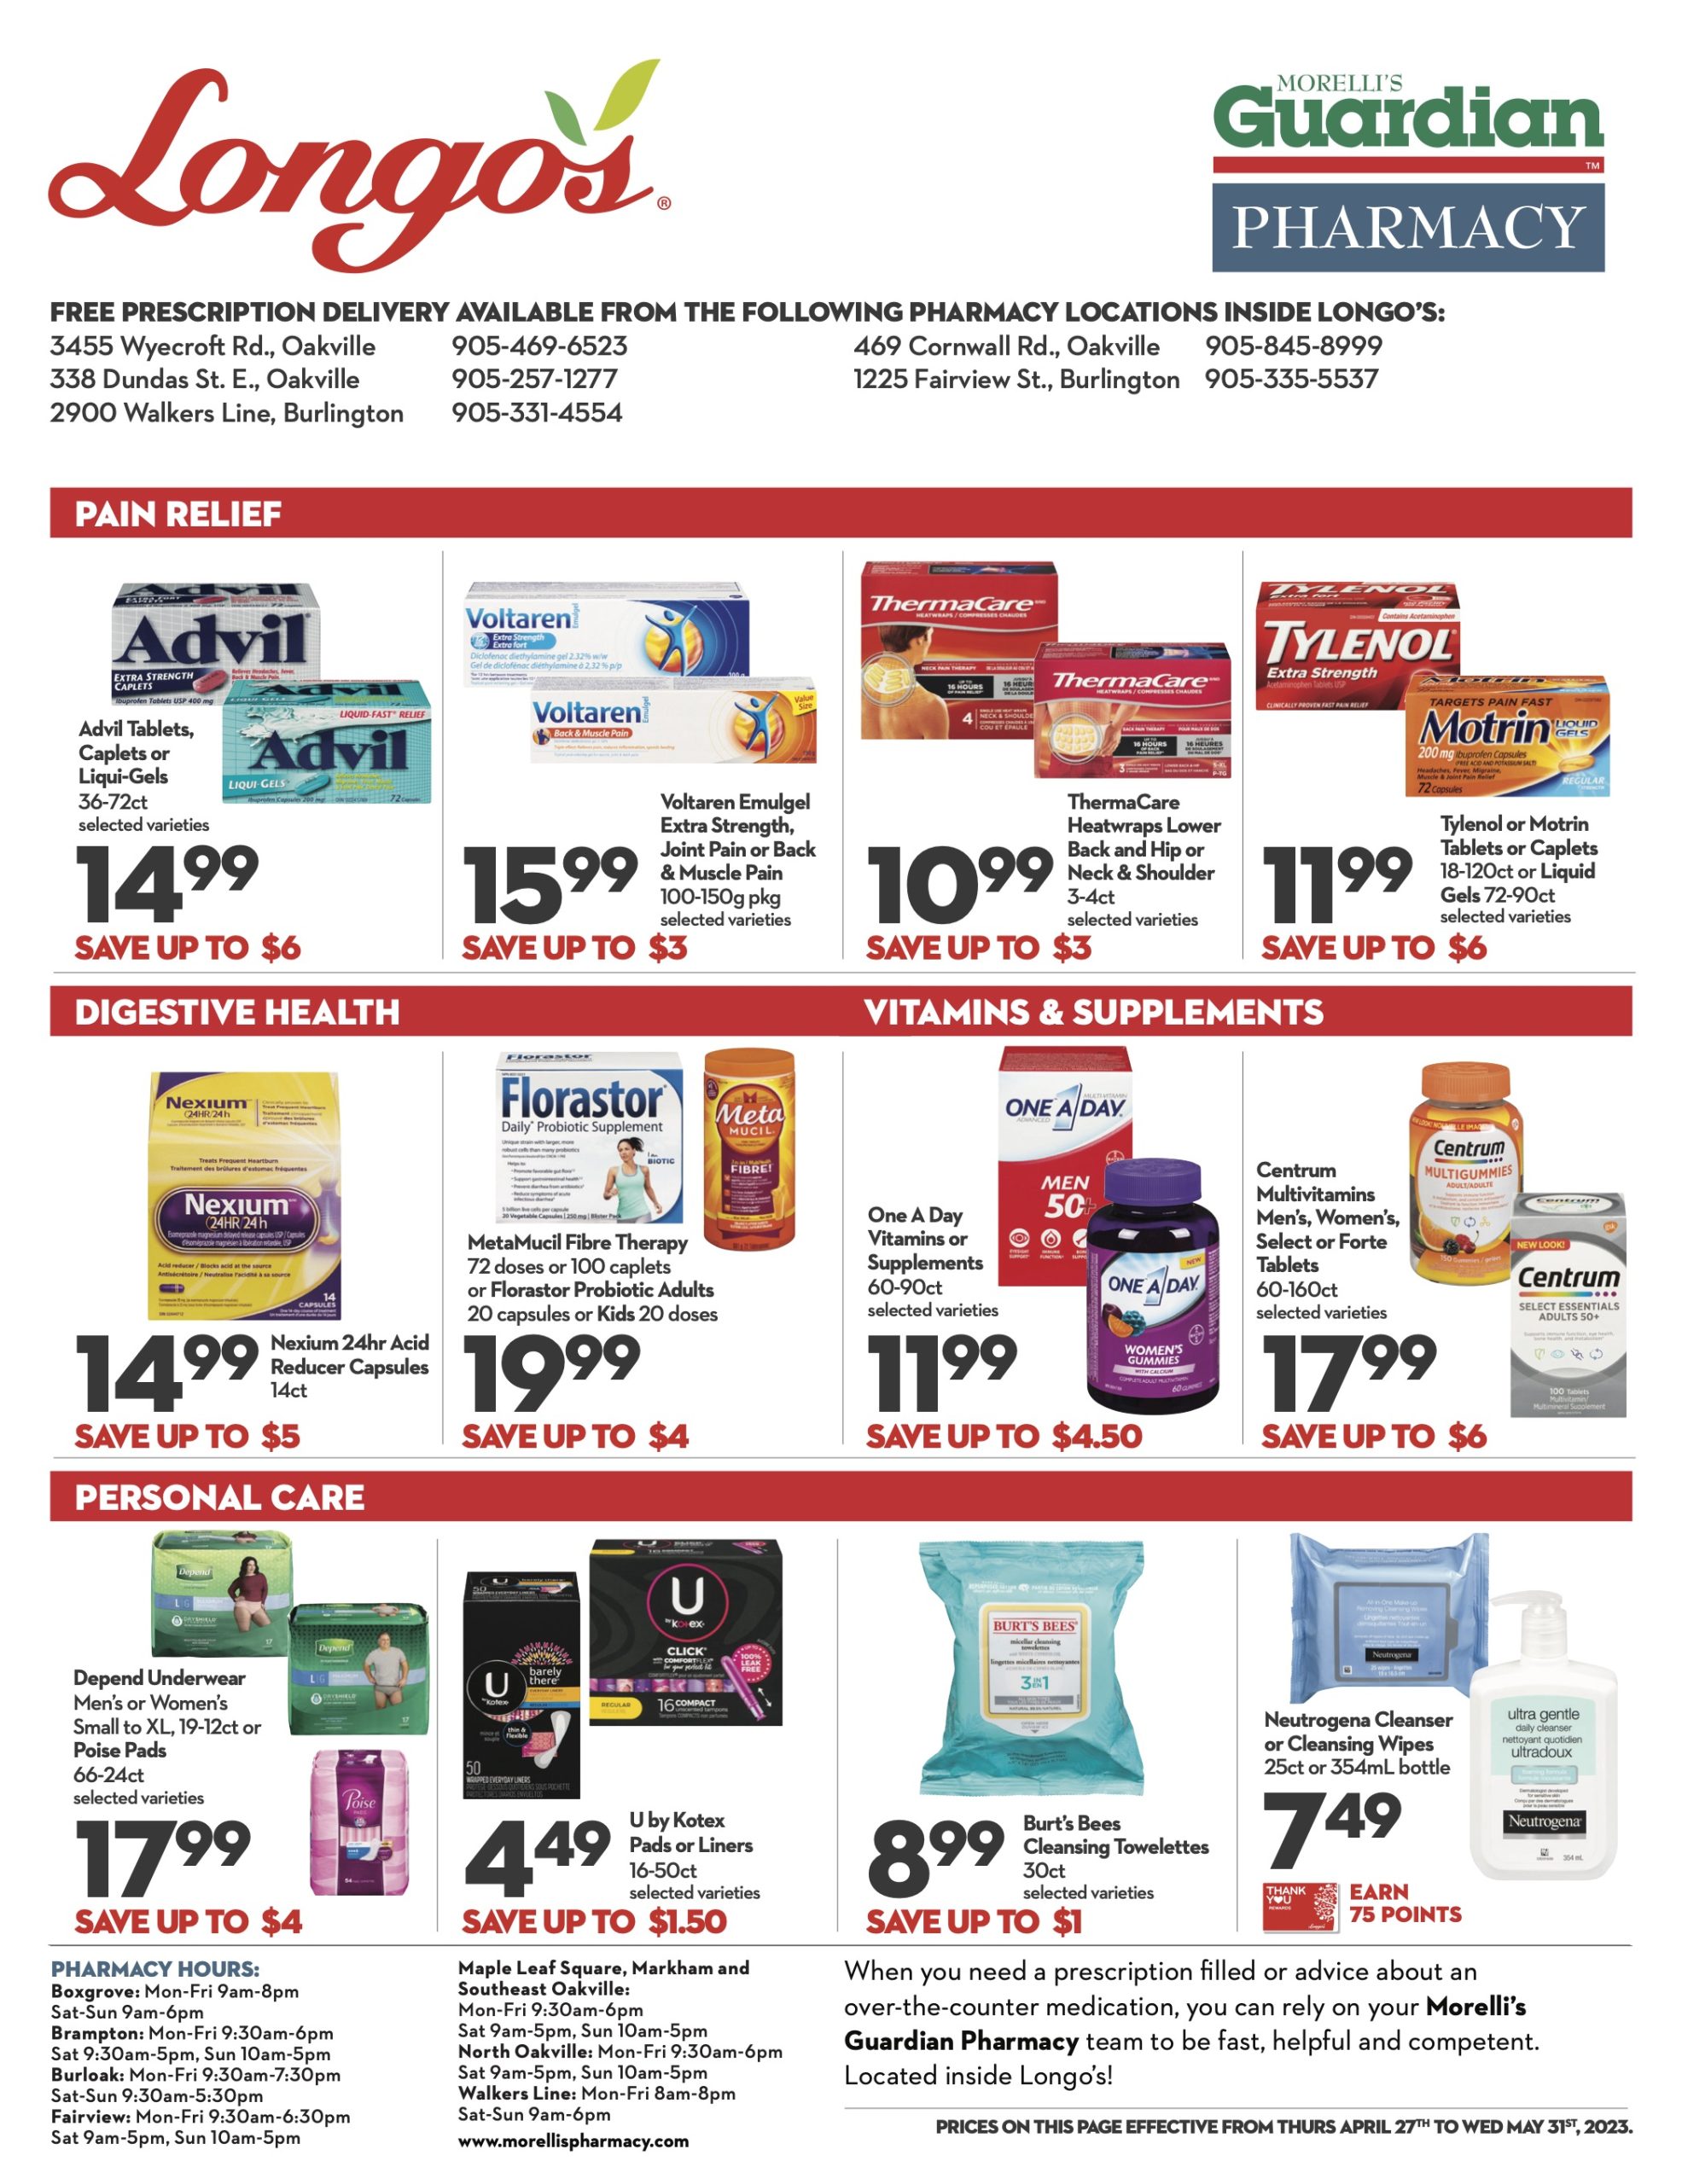 Flyer for Longo's Guardian Morelli's Pharmacy in the Greater Hamilton and Toronto Area